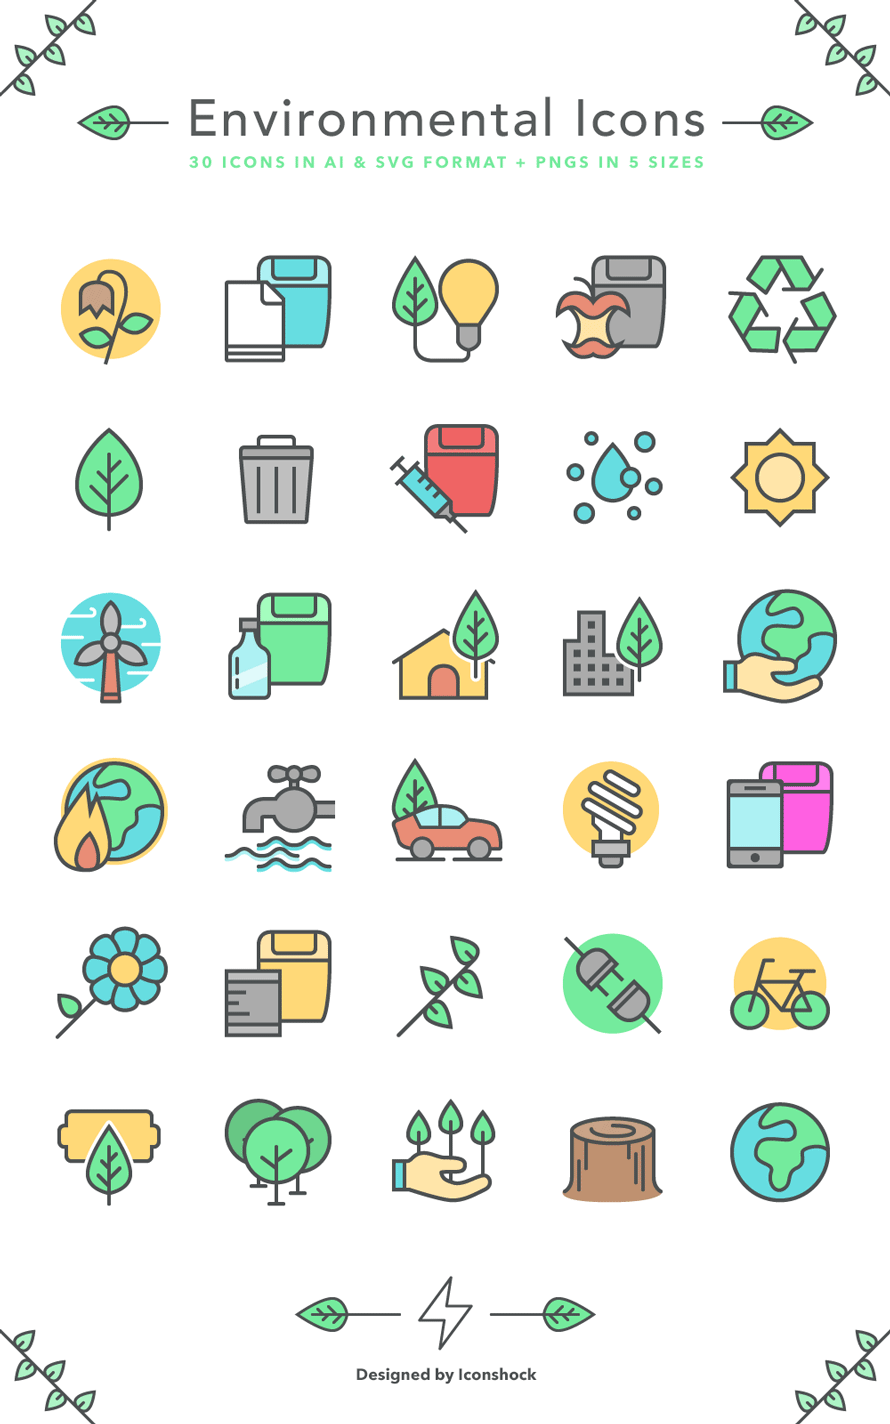 Environmental_icons_preview